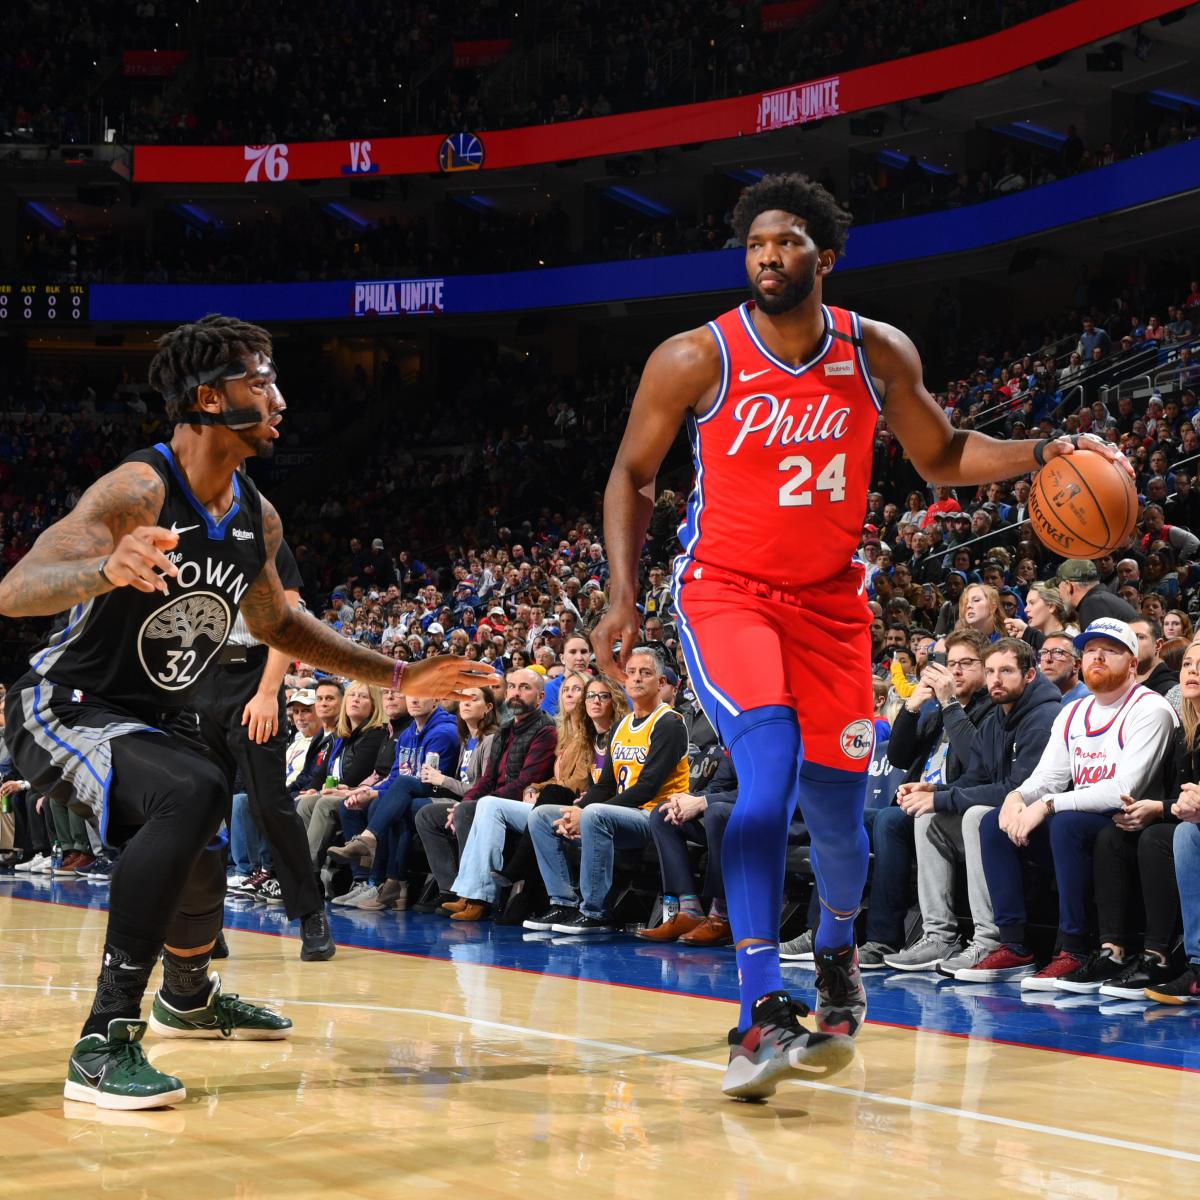 Joel Embiid wears No. 24 and scores 24 points as 76ers honor late Lakers  legend Kobe Bryant 